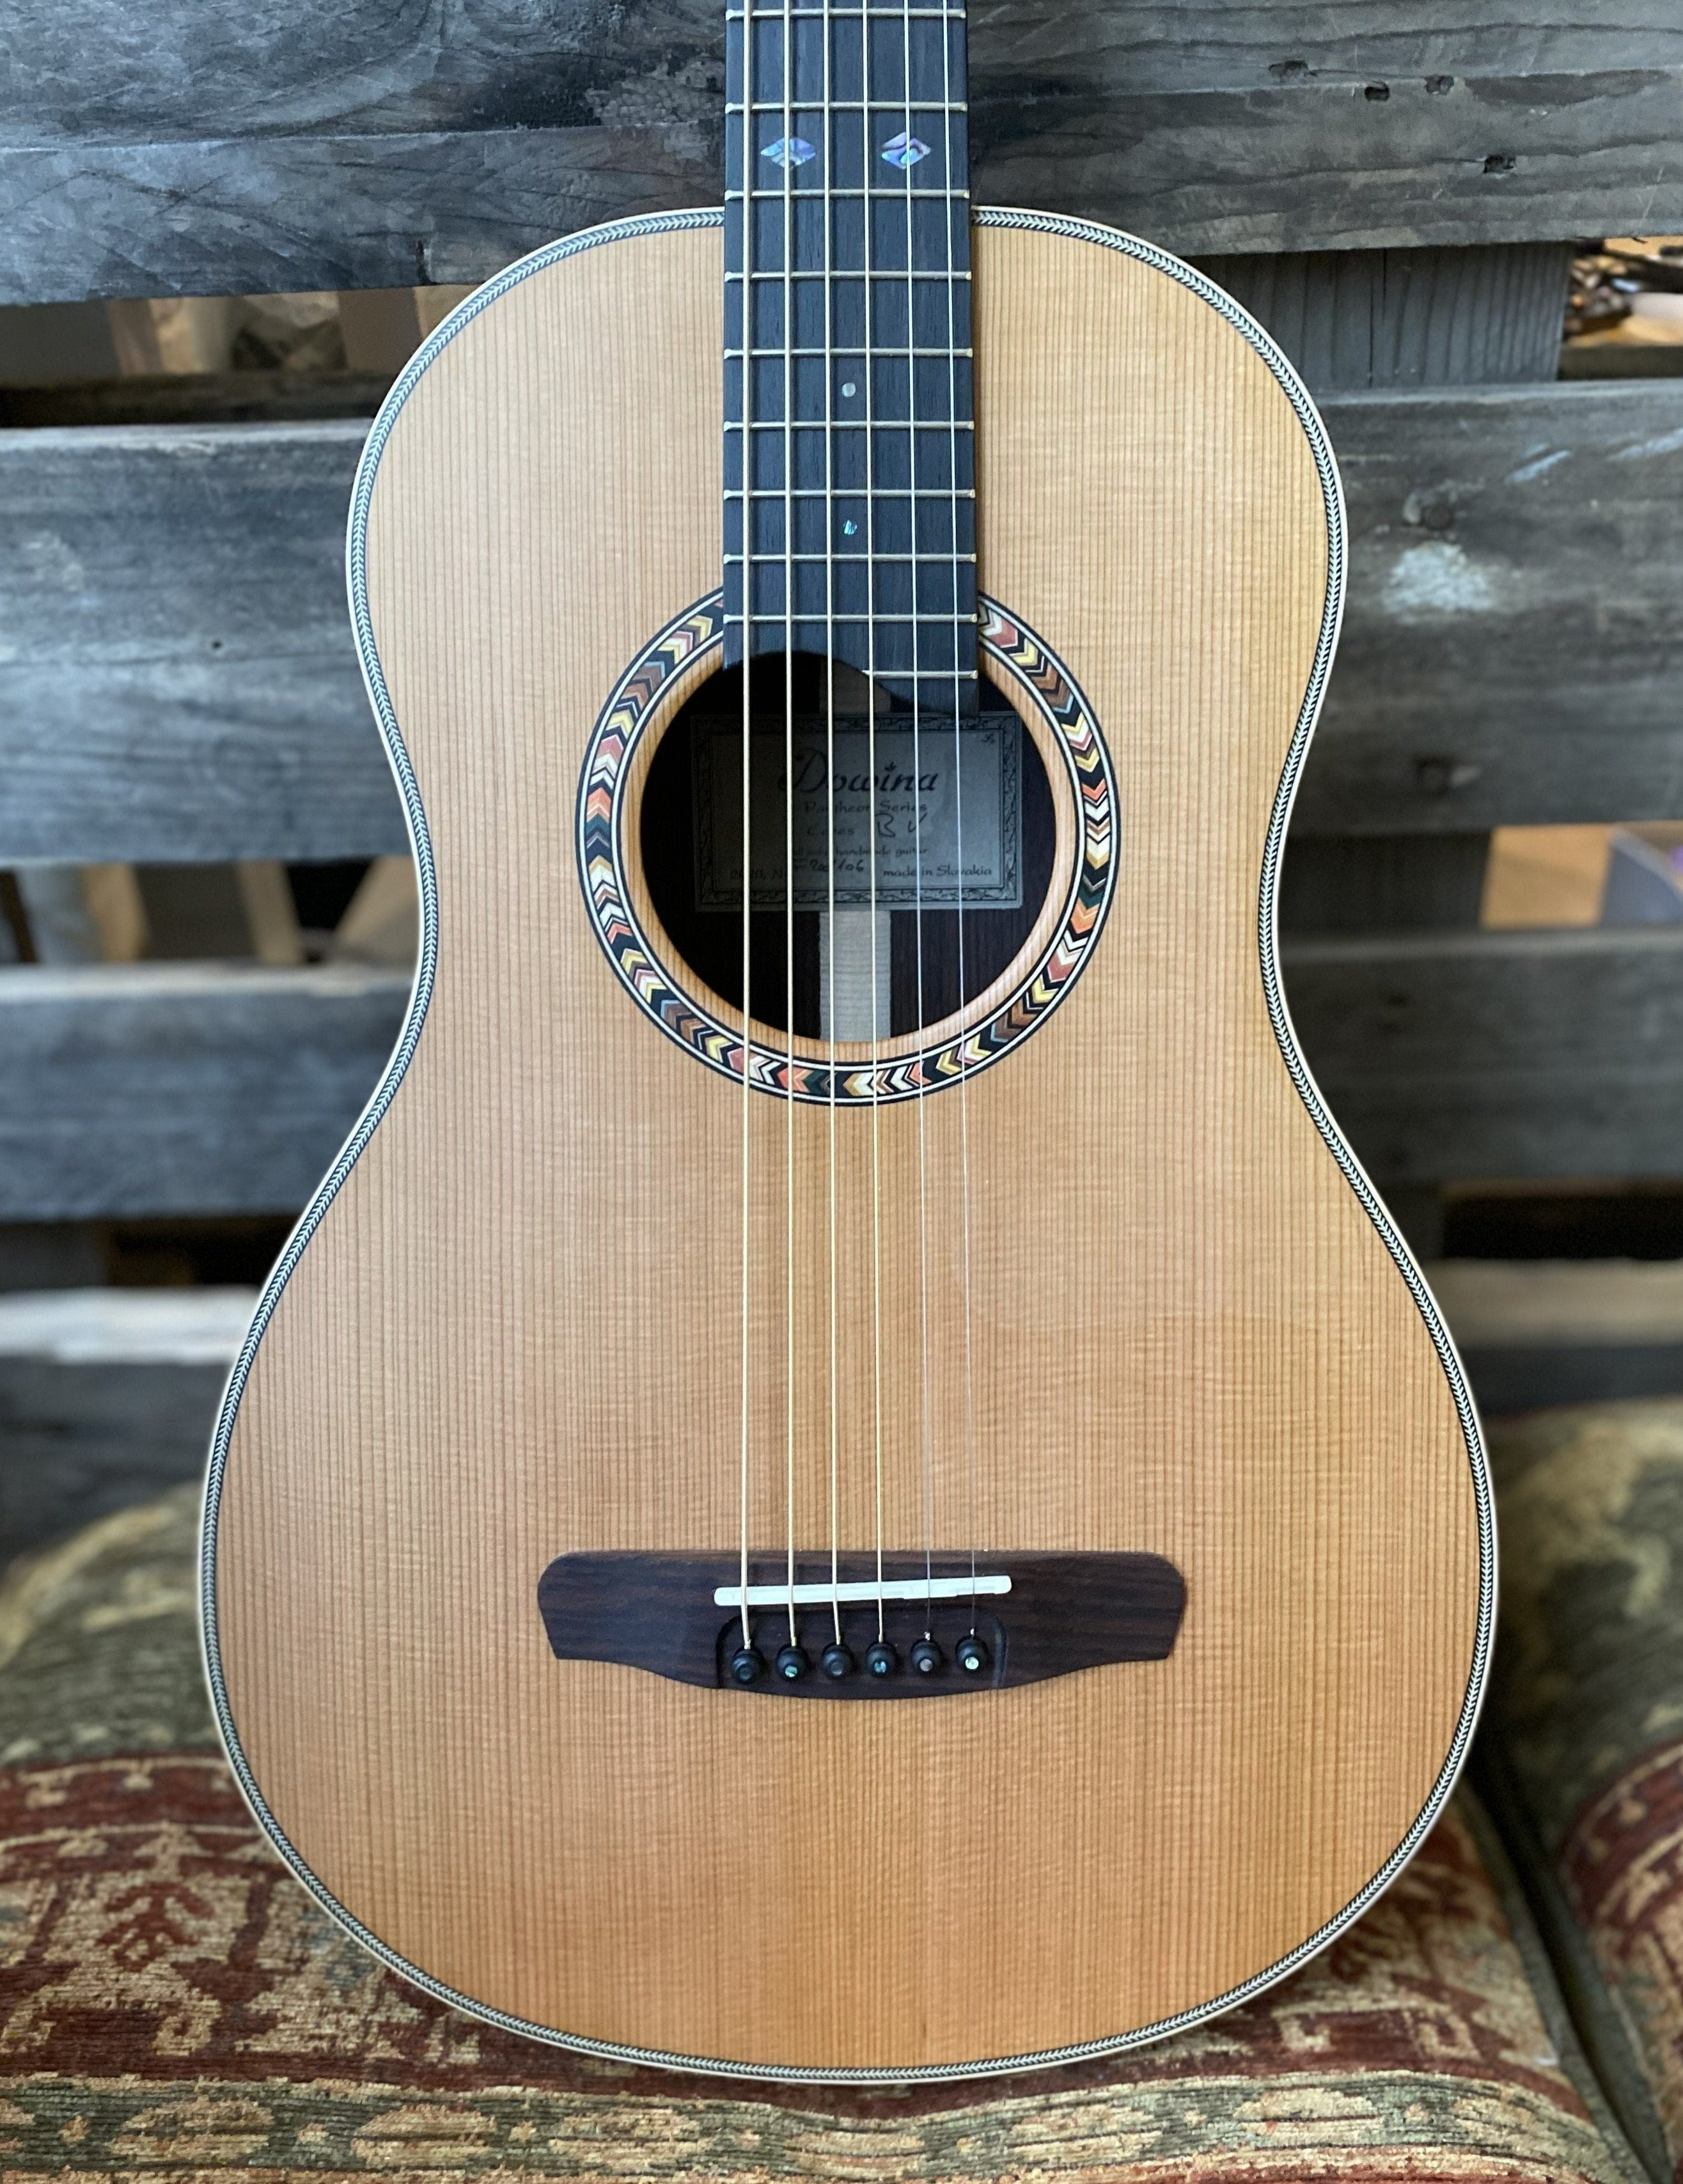 Dowina Rosewood (Ceres) BV, Acoustic Guitar for sale at Richards Guitars.